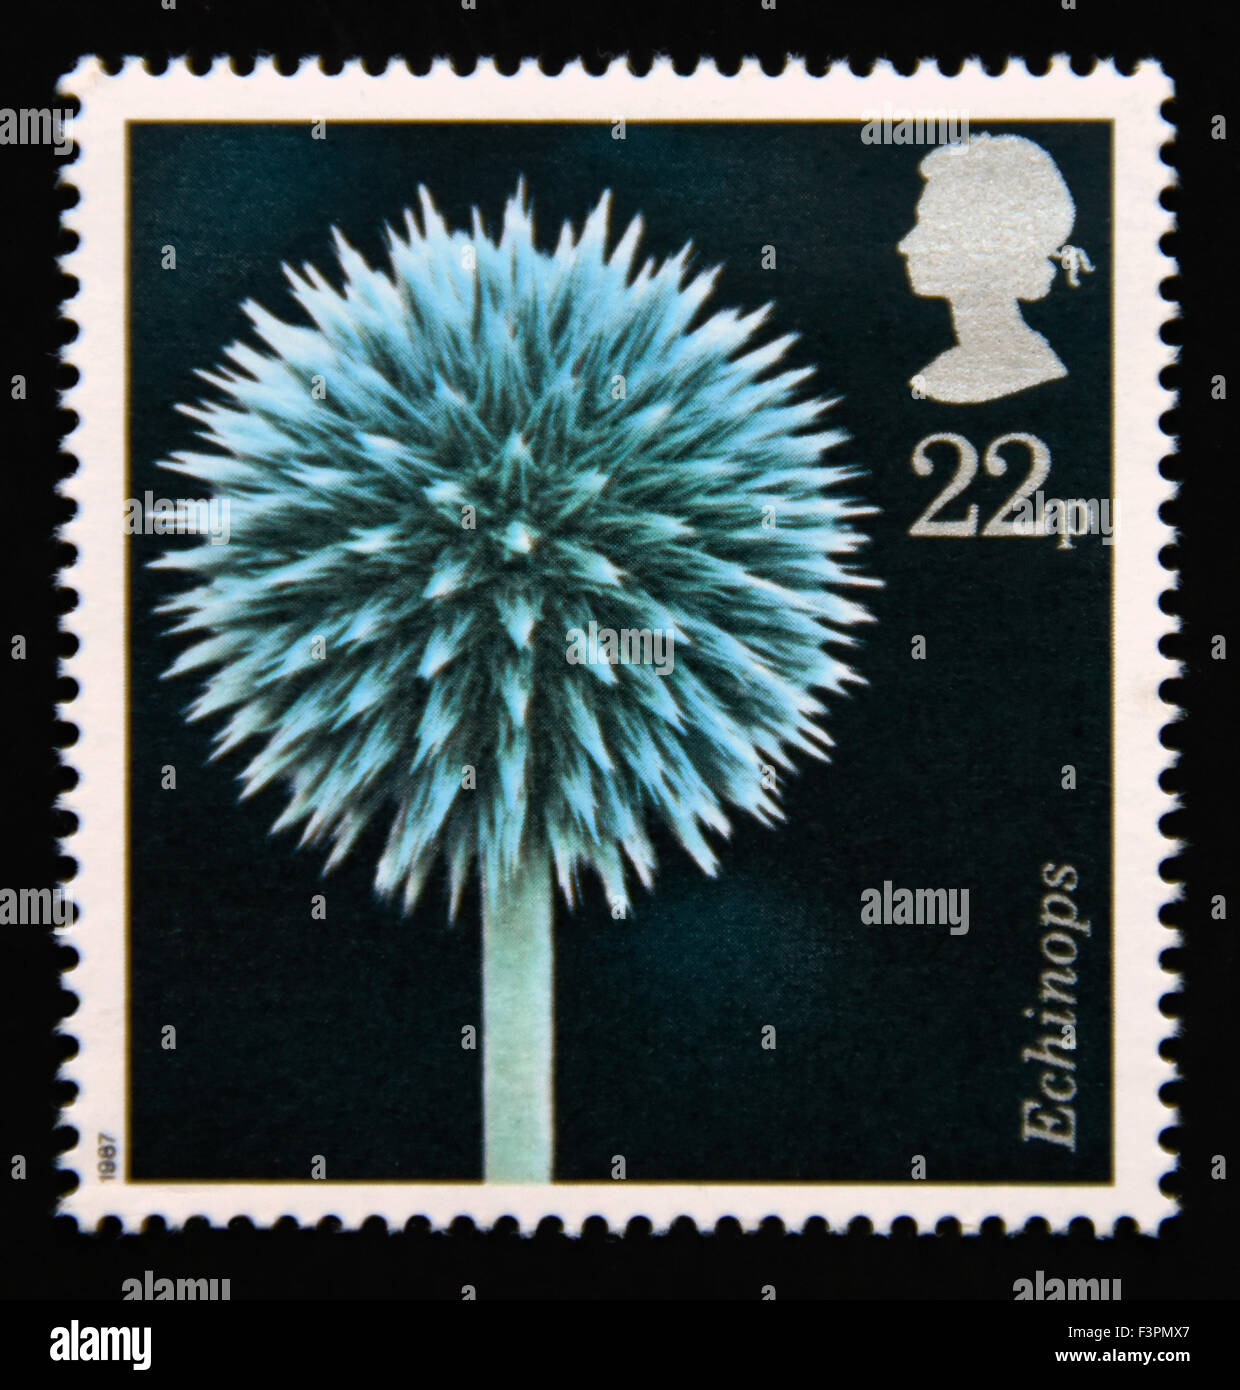 Postage stamp. Great Britain. Queen Elizabeth II. 1987. Flower Photographs by Alfred Lammer. 22p. Stock Photo